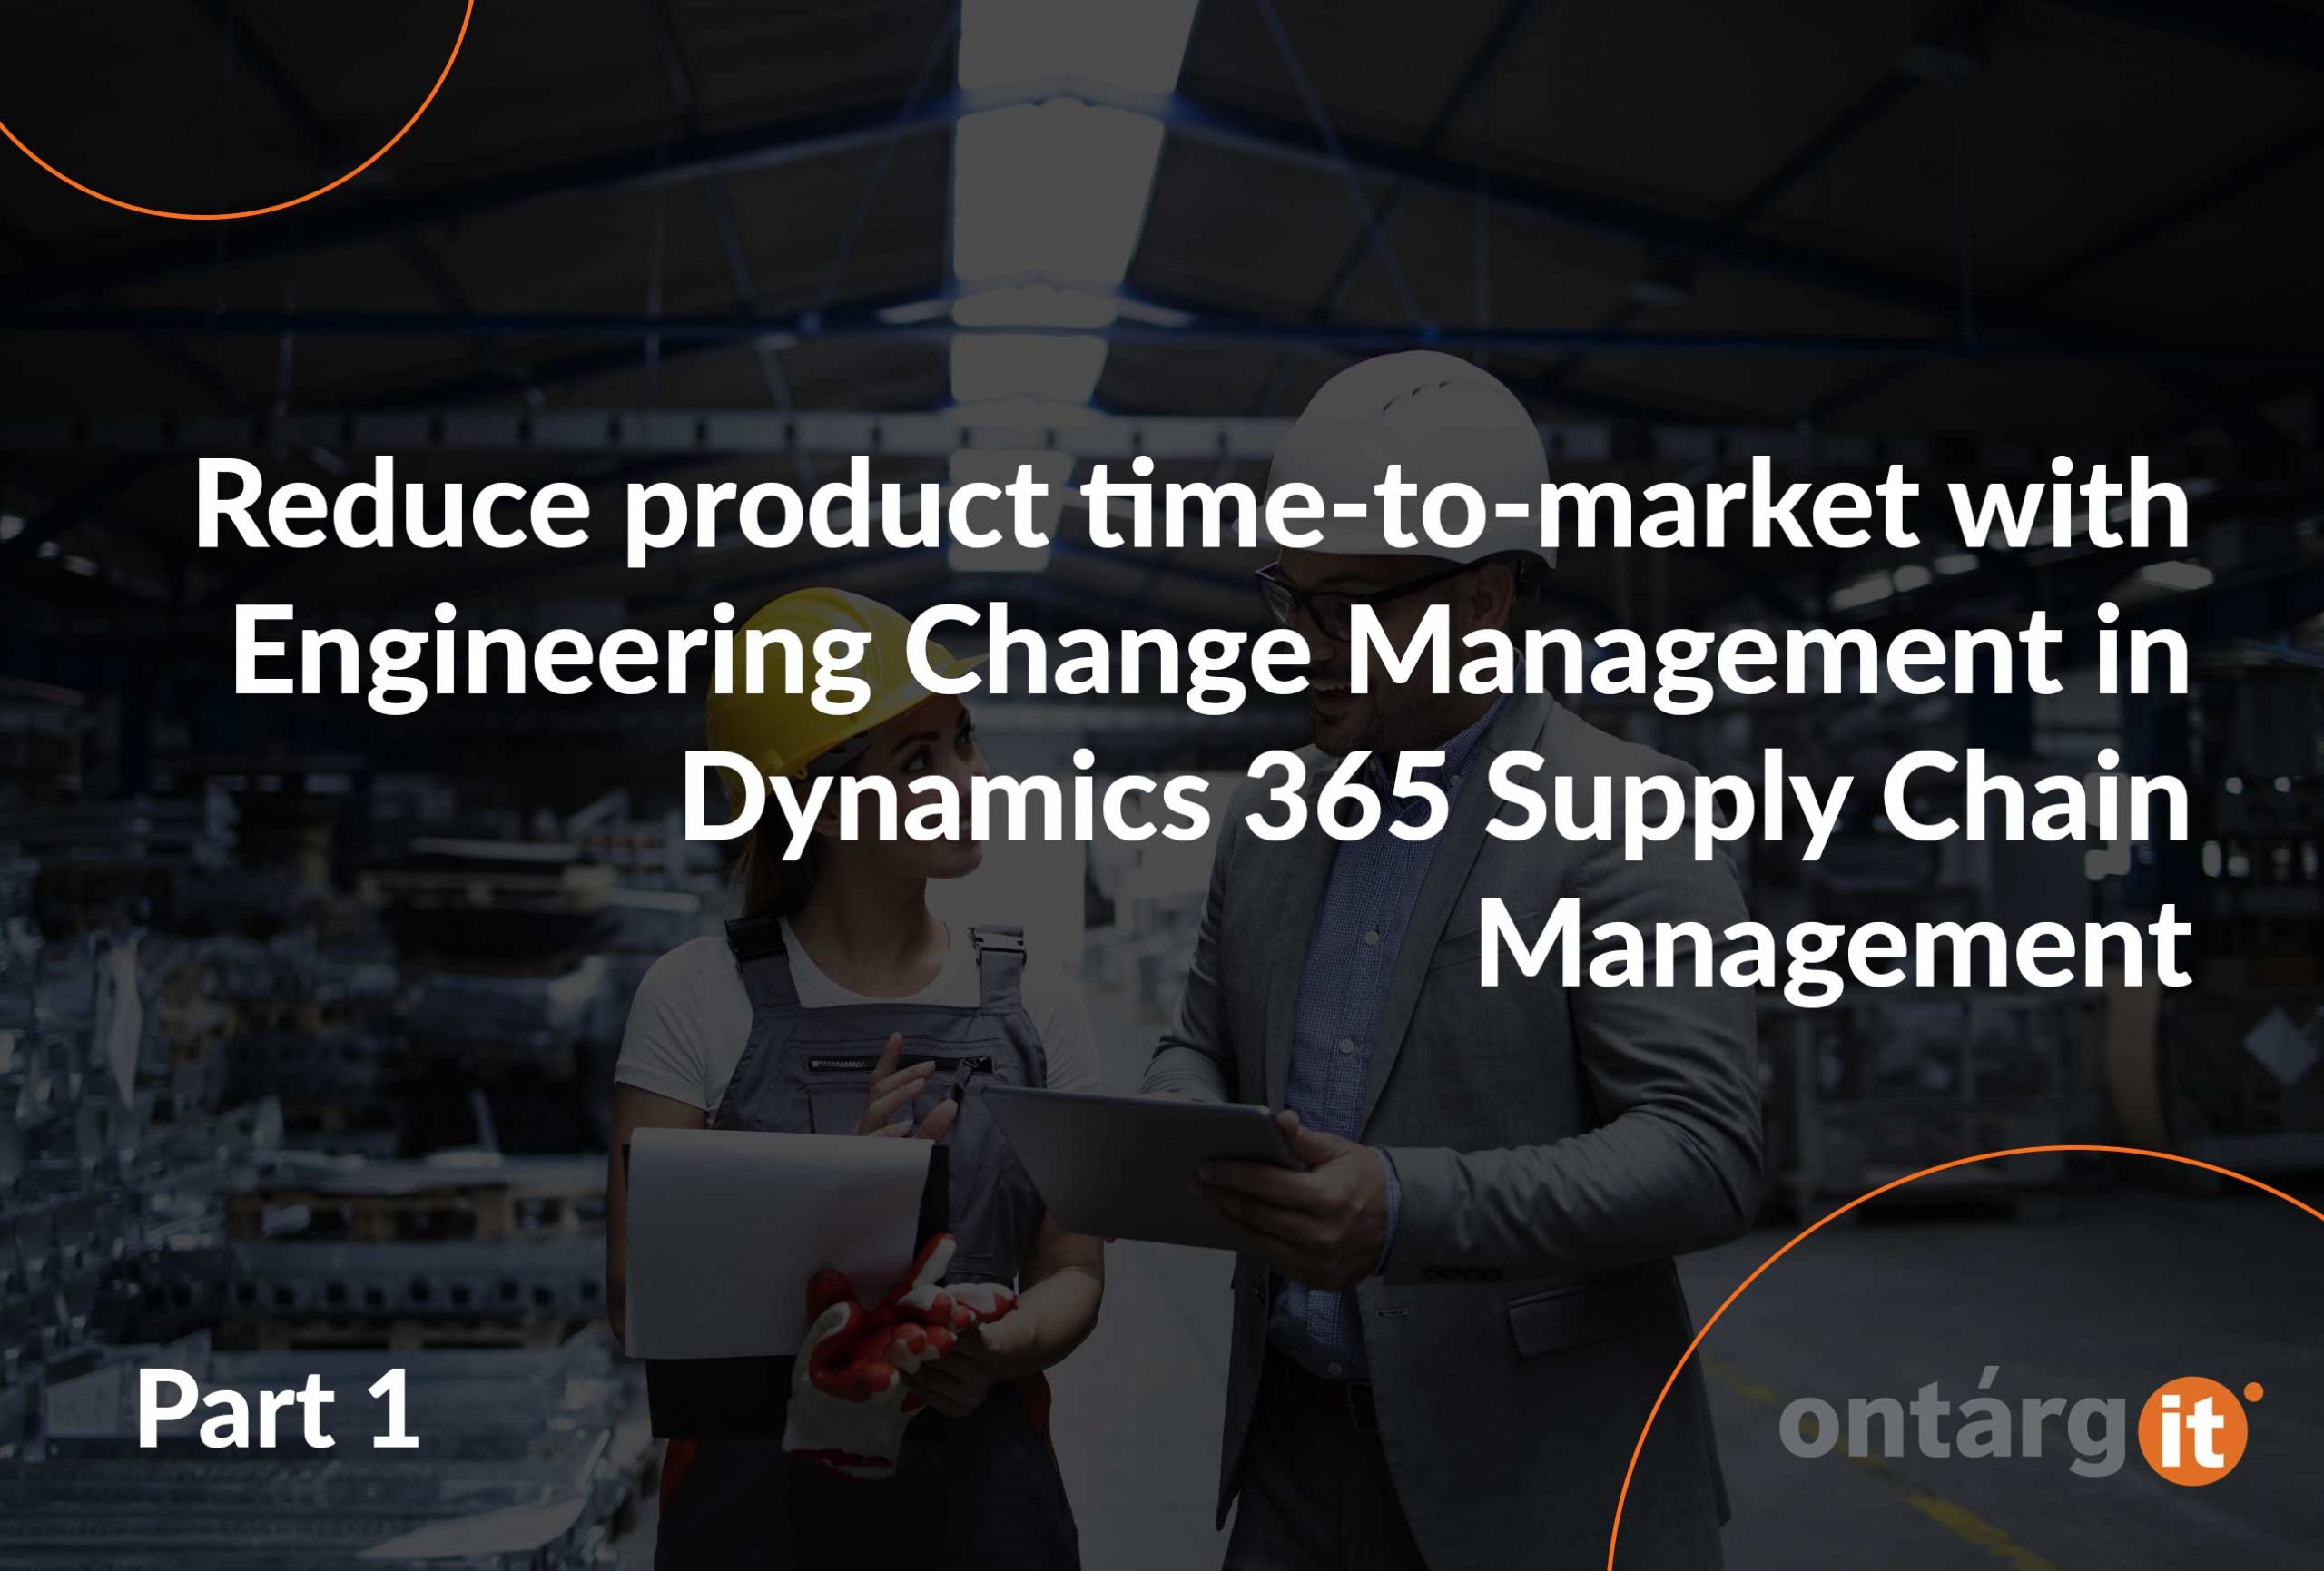 Reduce-product-time-to-market-with-Engineering-Change-Management-in-Dynamics-365-Supply-Chain-Management-part-1